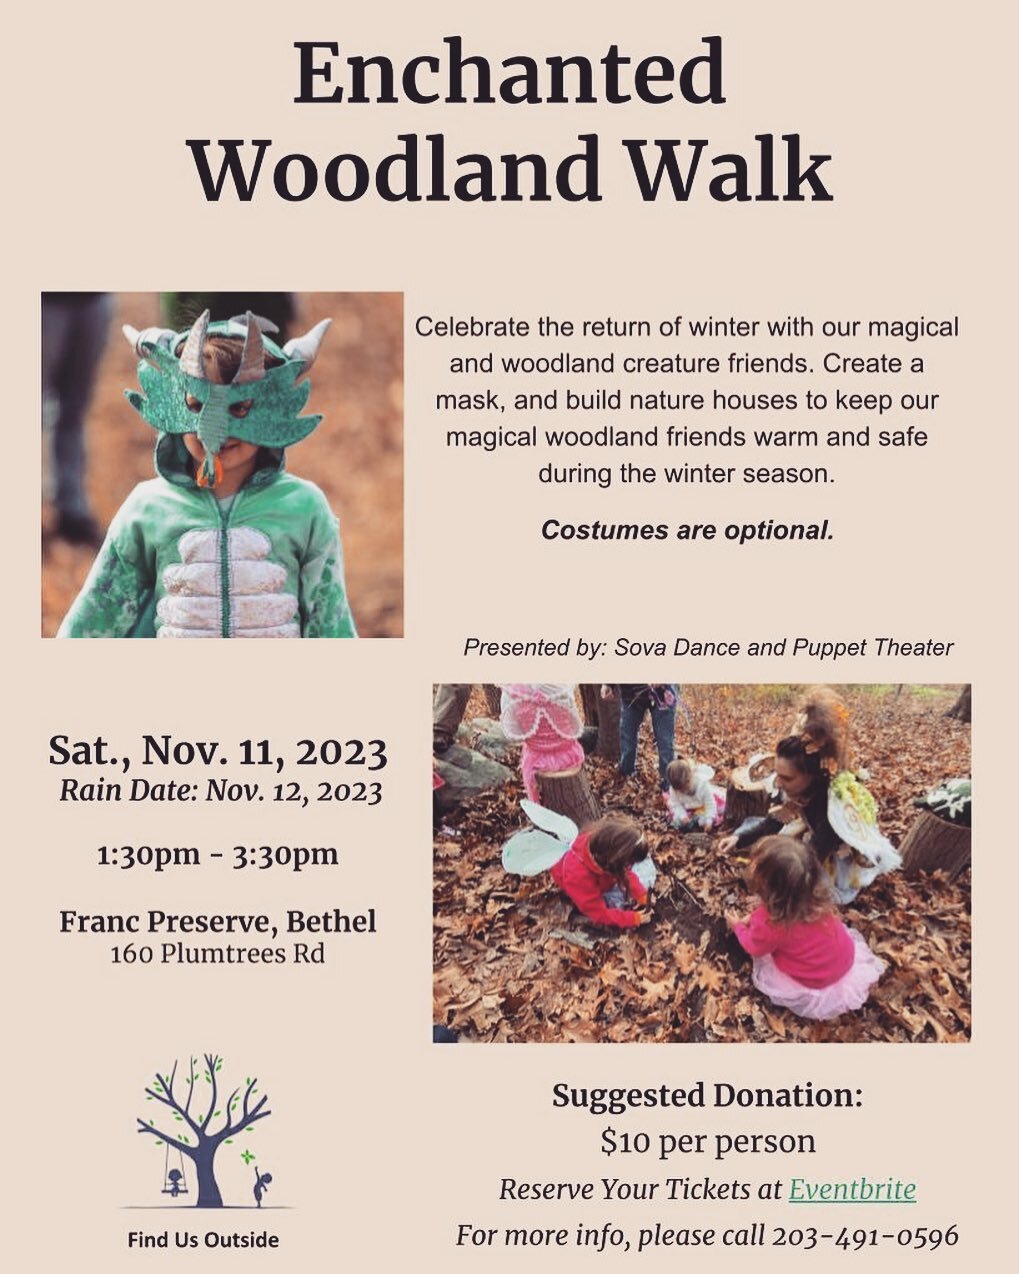 This weekend join us from some dramatic adventures through the forest in Bethel, CT at Franc&rsquo;s Preserve.  This has become an annual tradition to wish the first well overwinter in the Northeast.  #dramahike #wonderfulwoodland #enchantedhike #adv